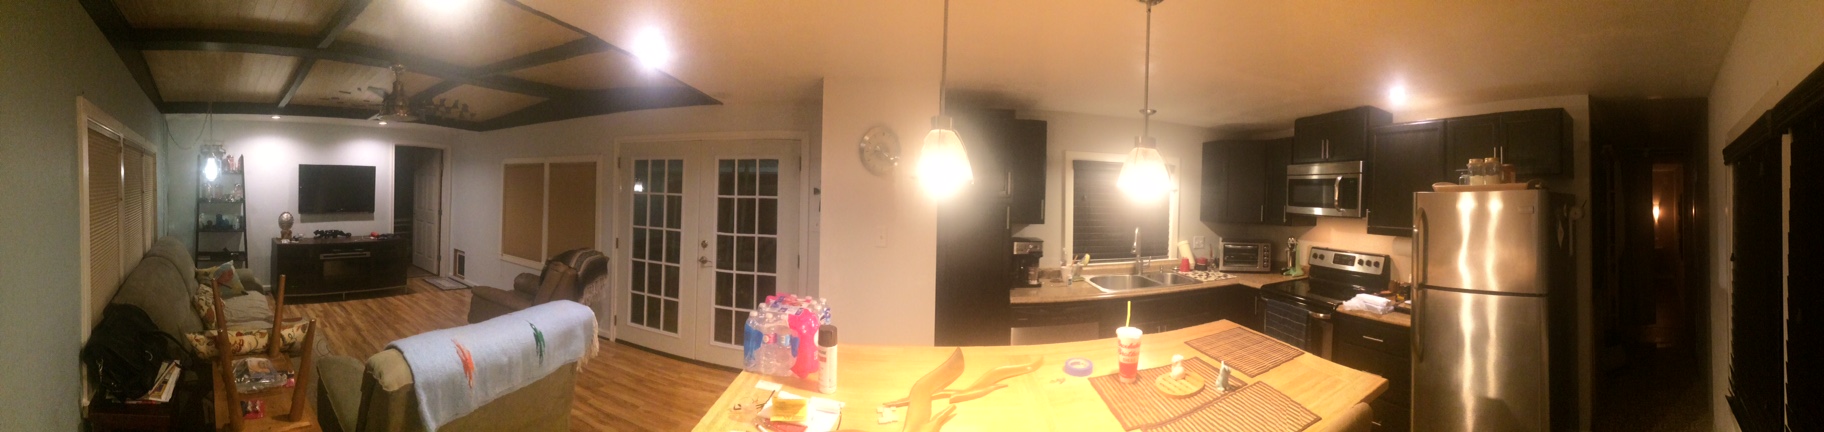 Panoramic Picture Of A Living Room, Dining Room and Kitchen.